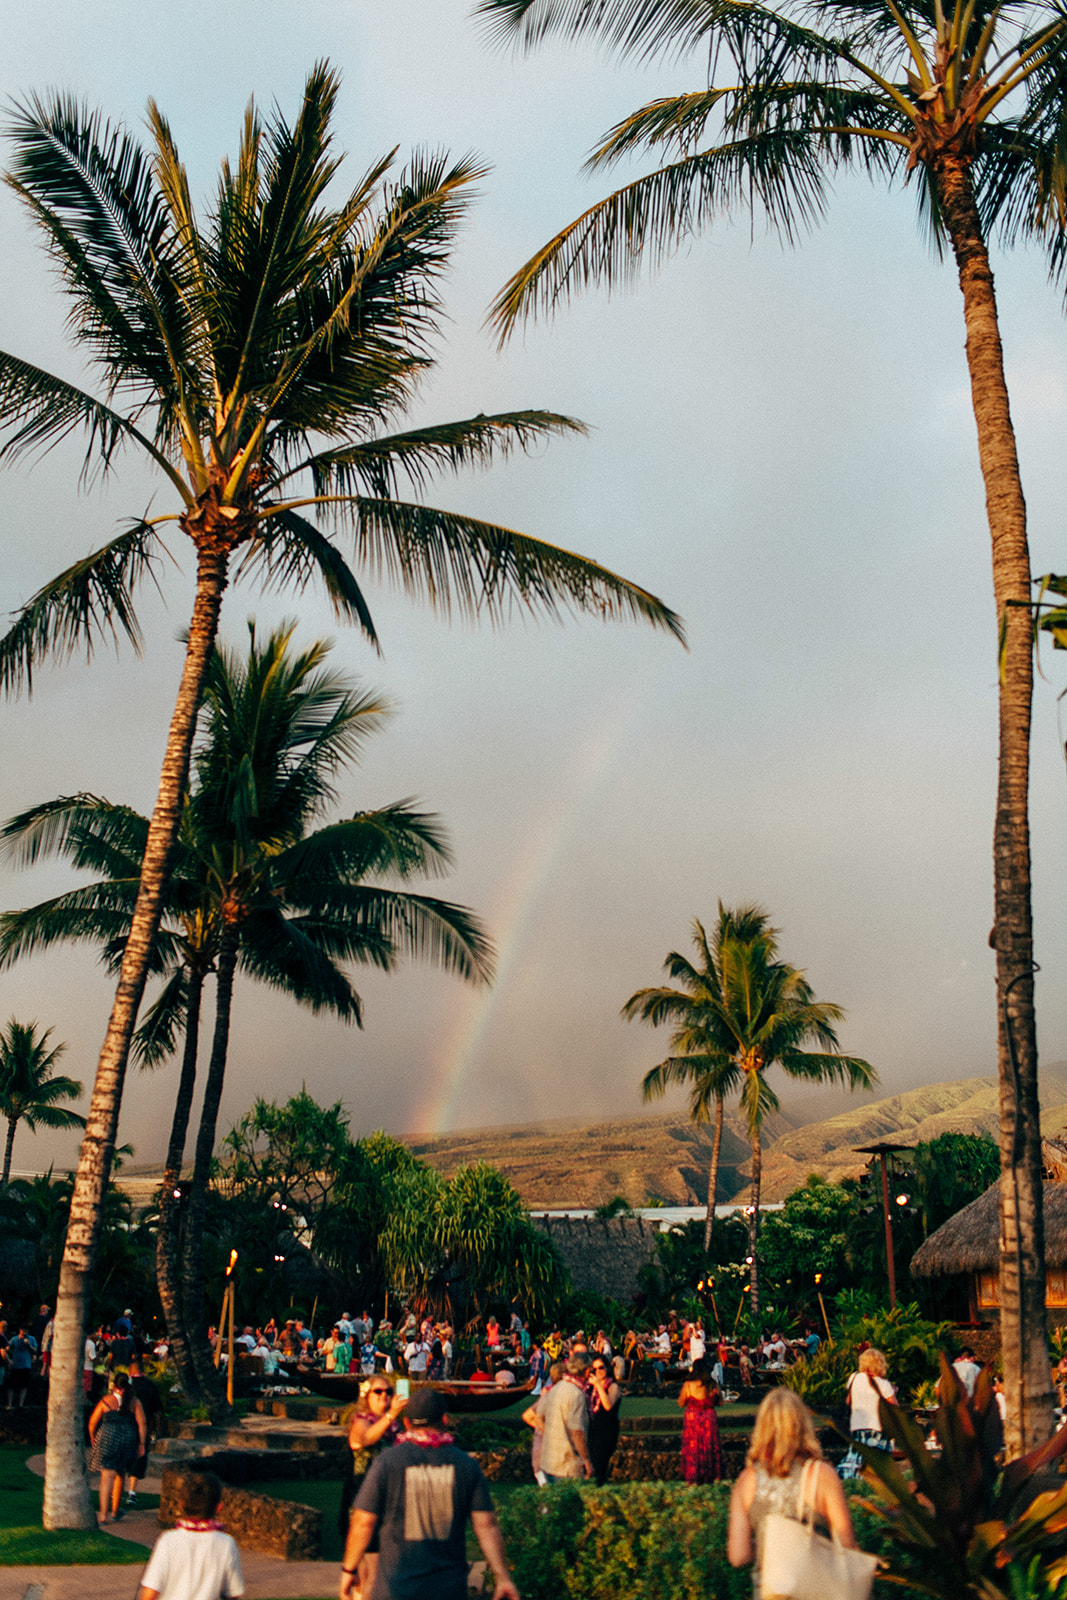 Rainbow over the palm trees in Hawaii